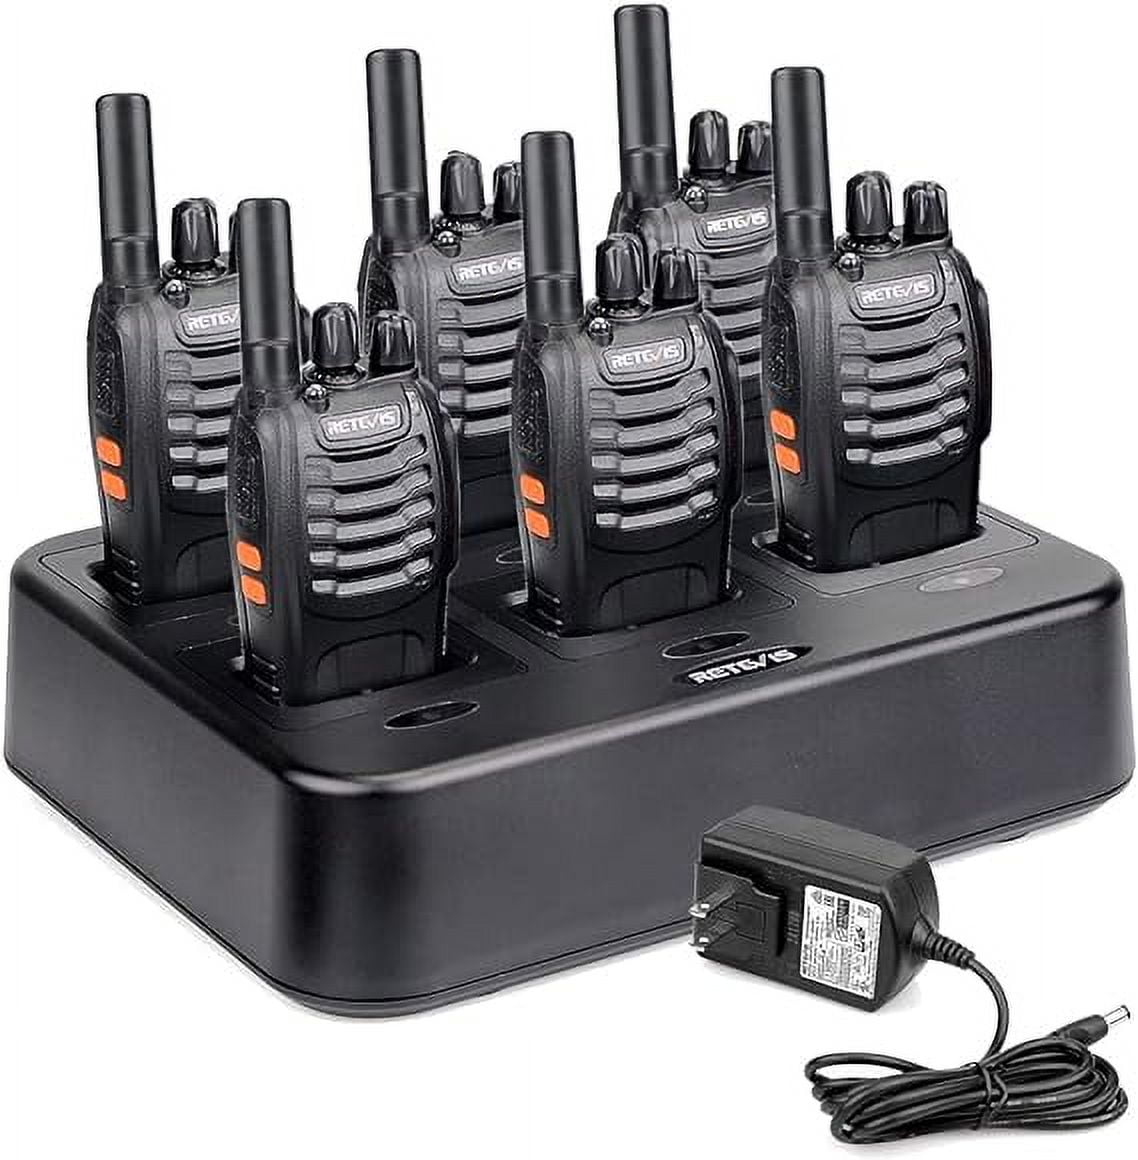  Retevis RT68 Walkie Talkies for Adults, 2 Way Radios Long  Range, Hands Free, 1200mAh Battery, Portable Walkie Talkie Rechargeable  with USB Charging Base, for Hunting Road Trip Hiking Family (4 Pack) 